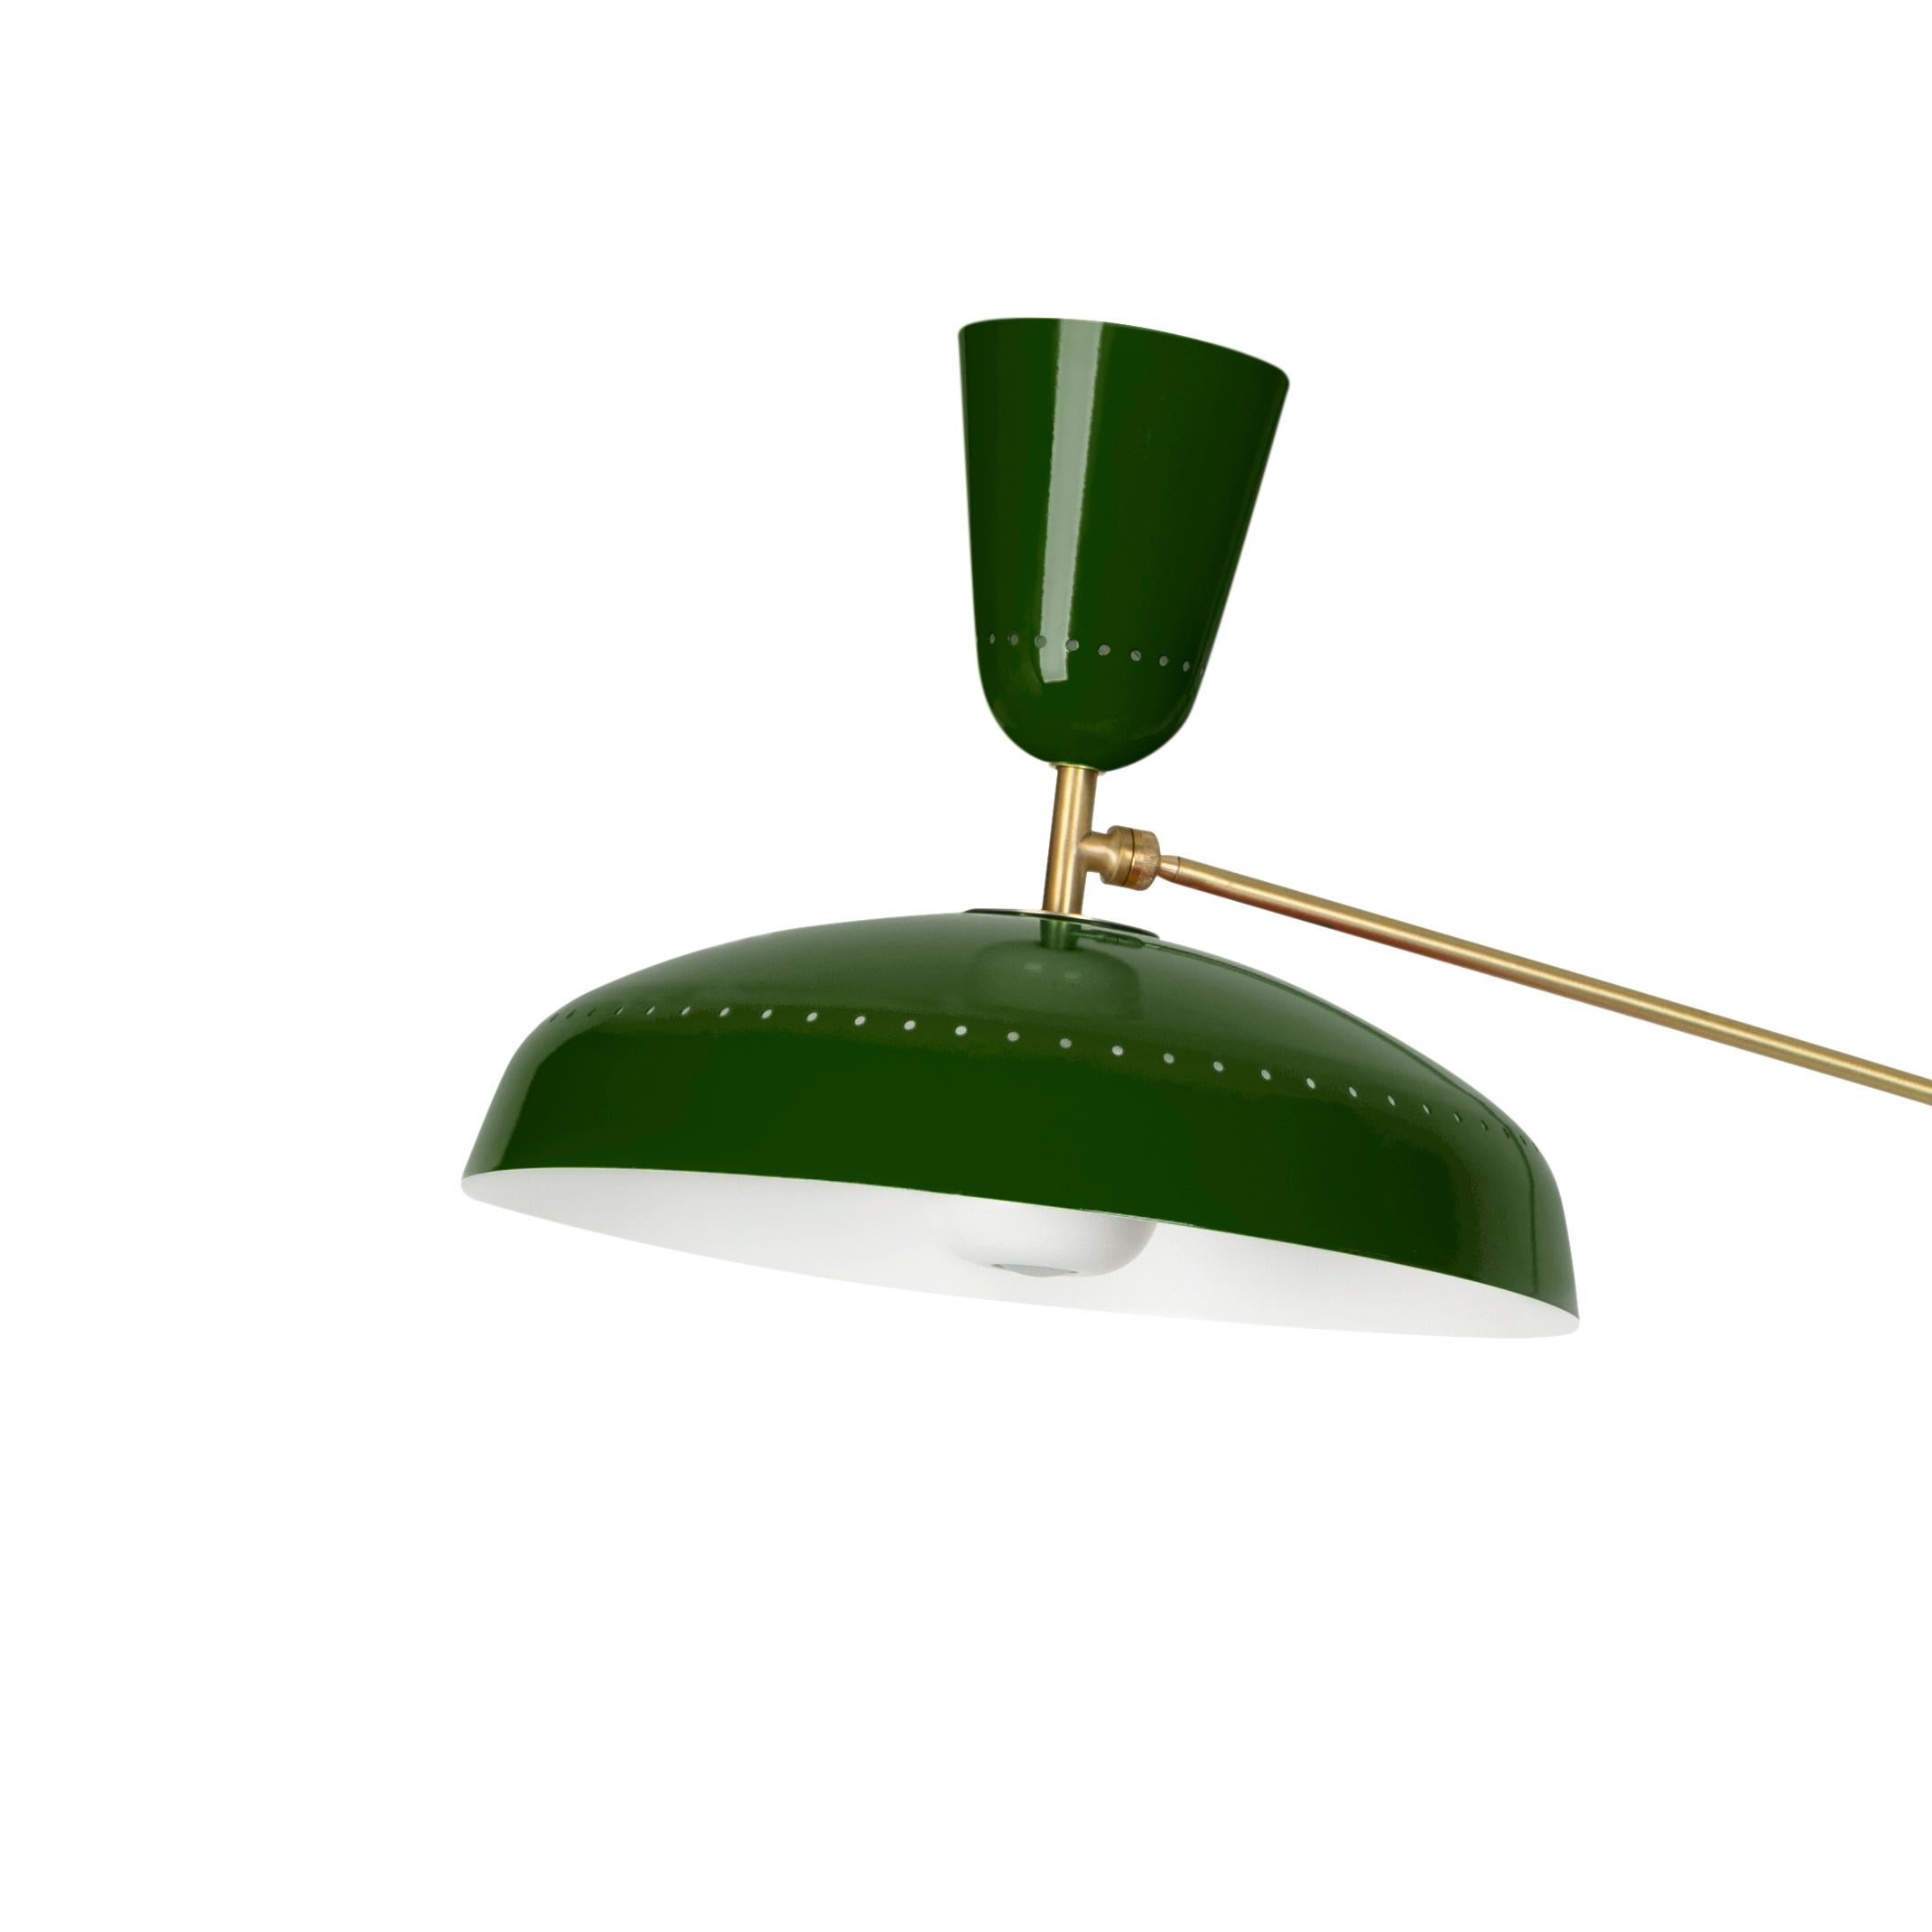 Large Pierre Guariche 'G1' Floor Lamp for Sammode Studio in Green In New Condition For Sale In Glendale, CA